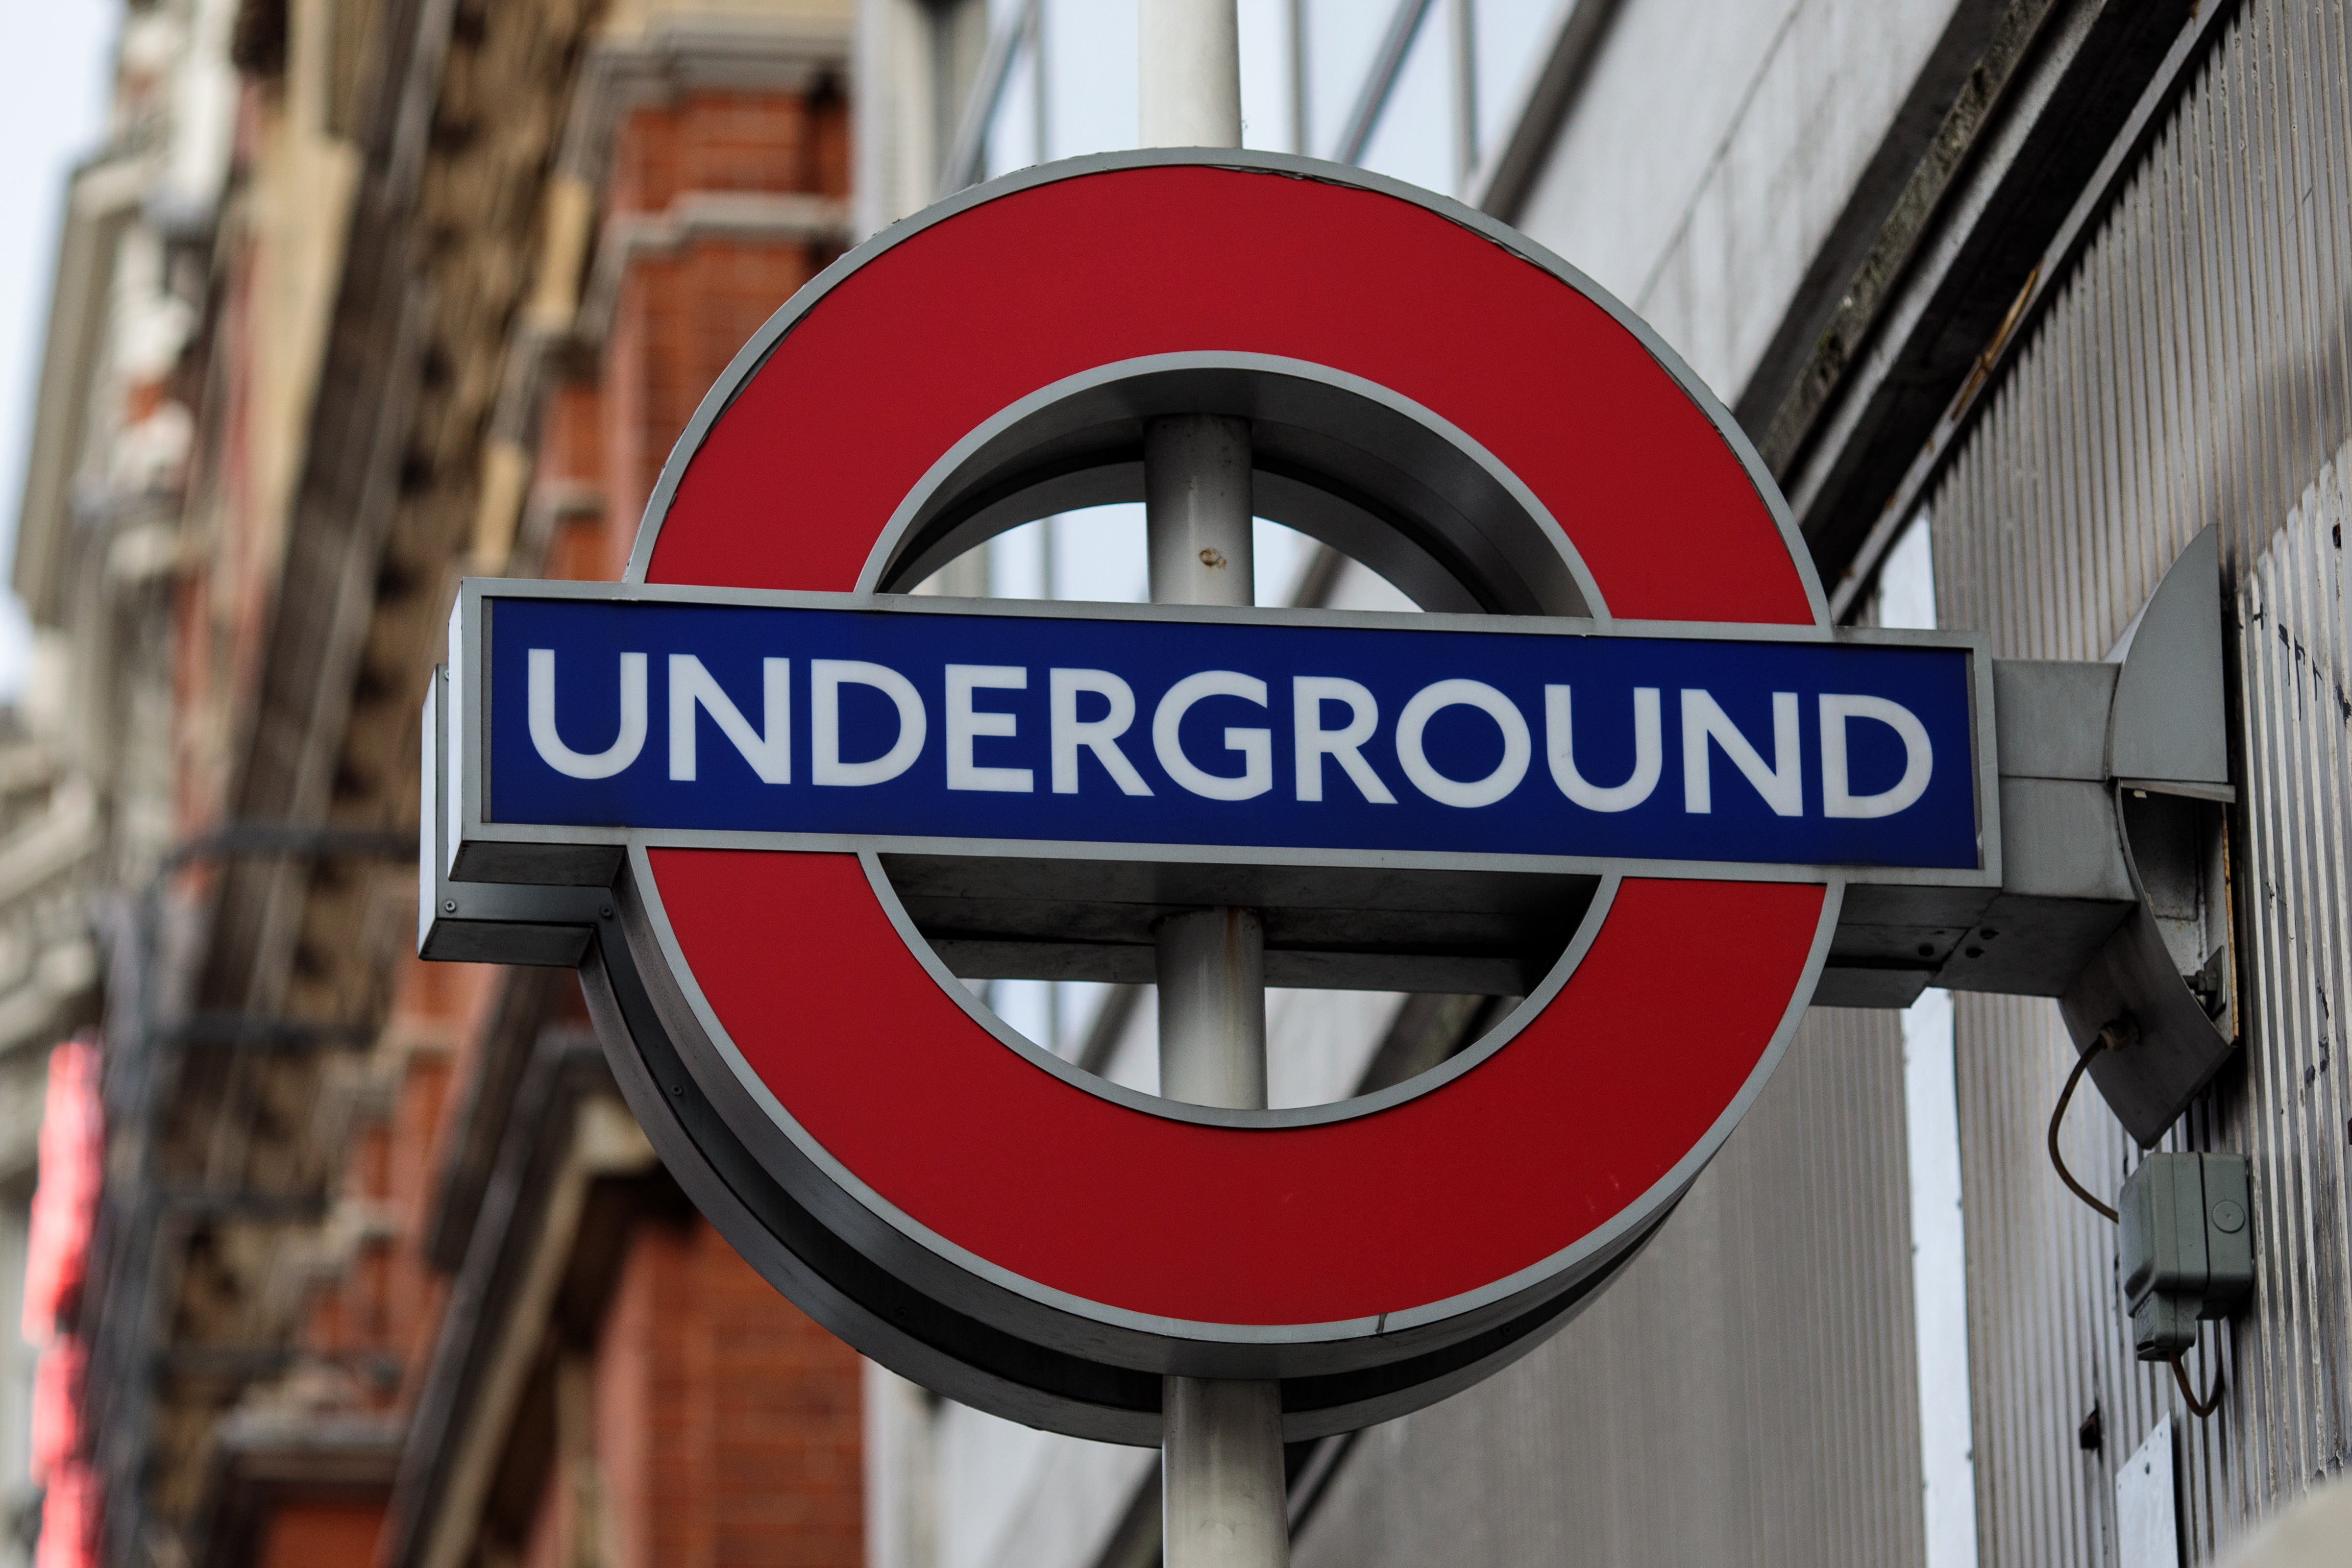 In a normal year, an astonishing 1.35 billion people venture below the streets to make a journey on the Underground